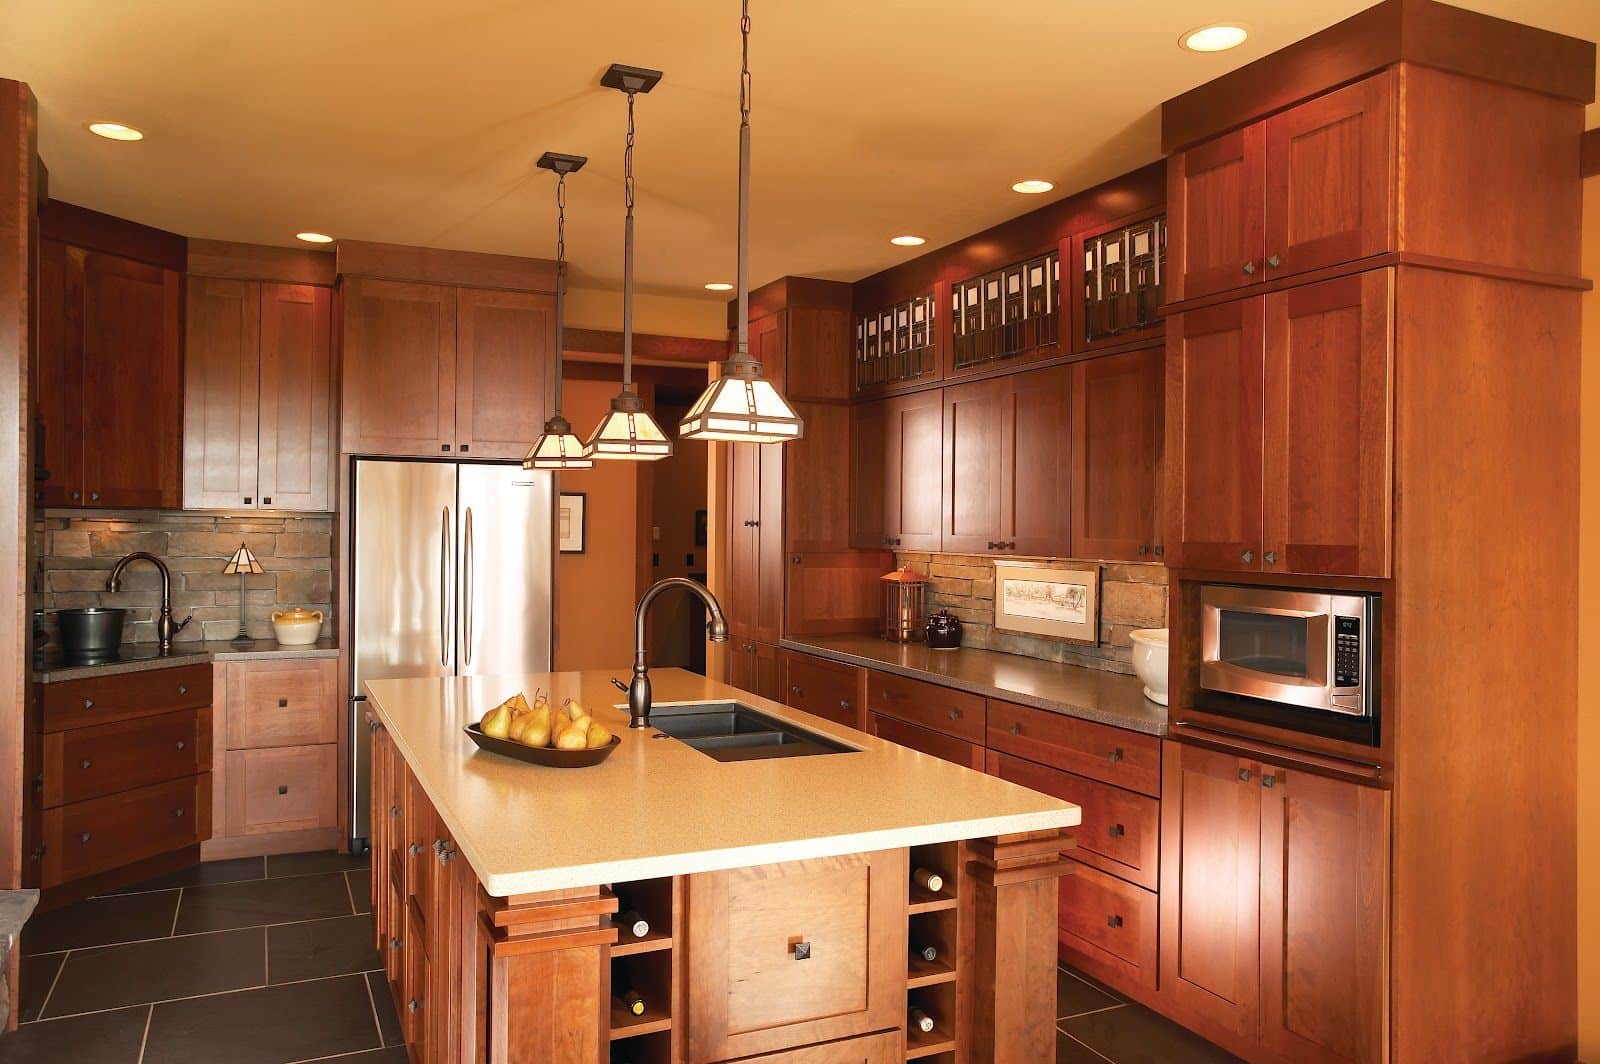 How To Clean Wooden Kitchen Cabinets